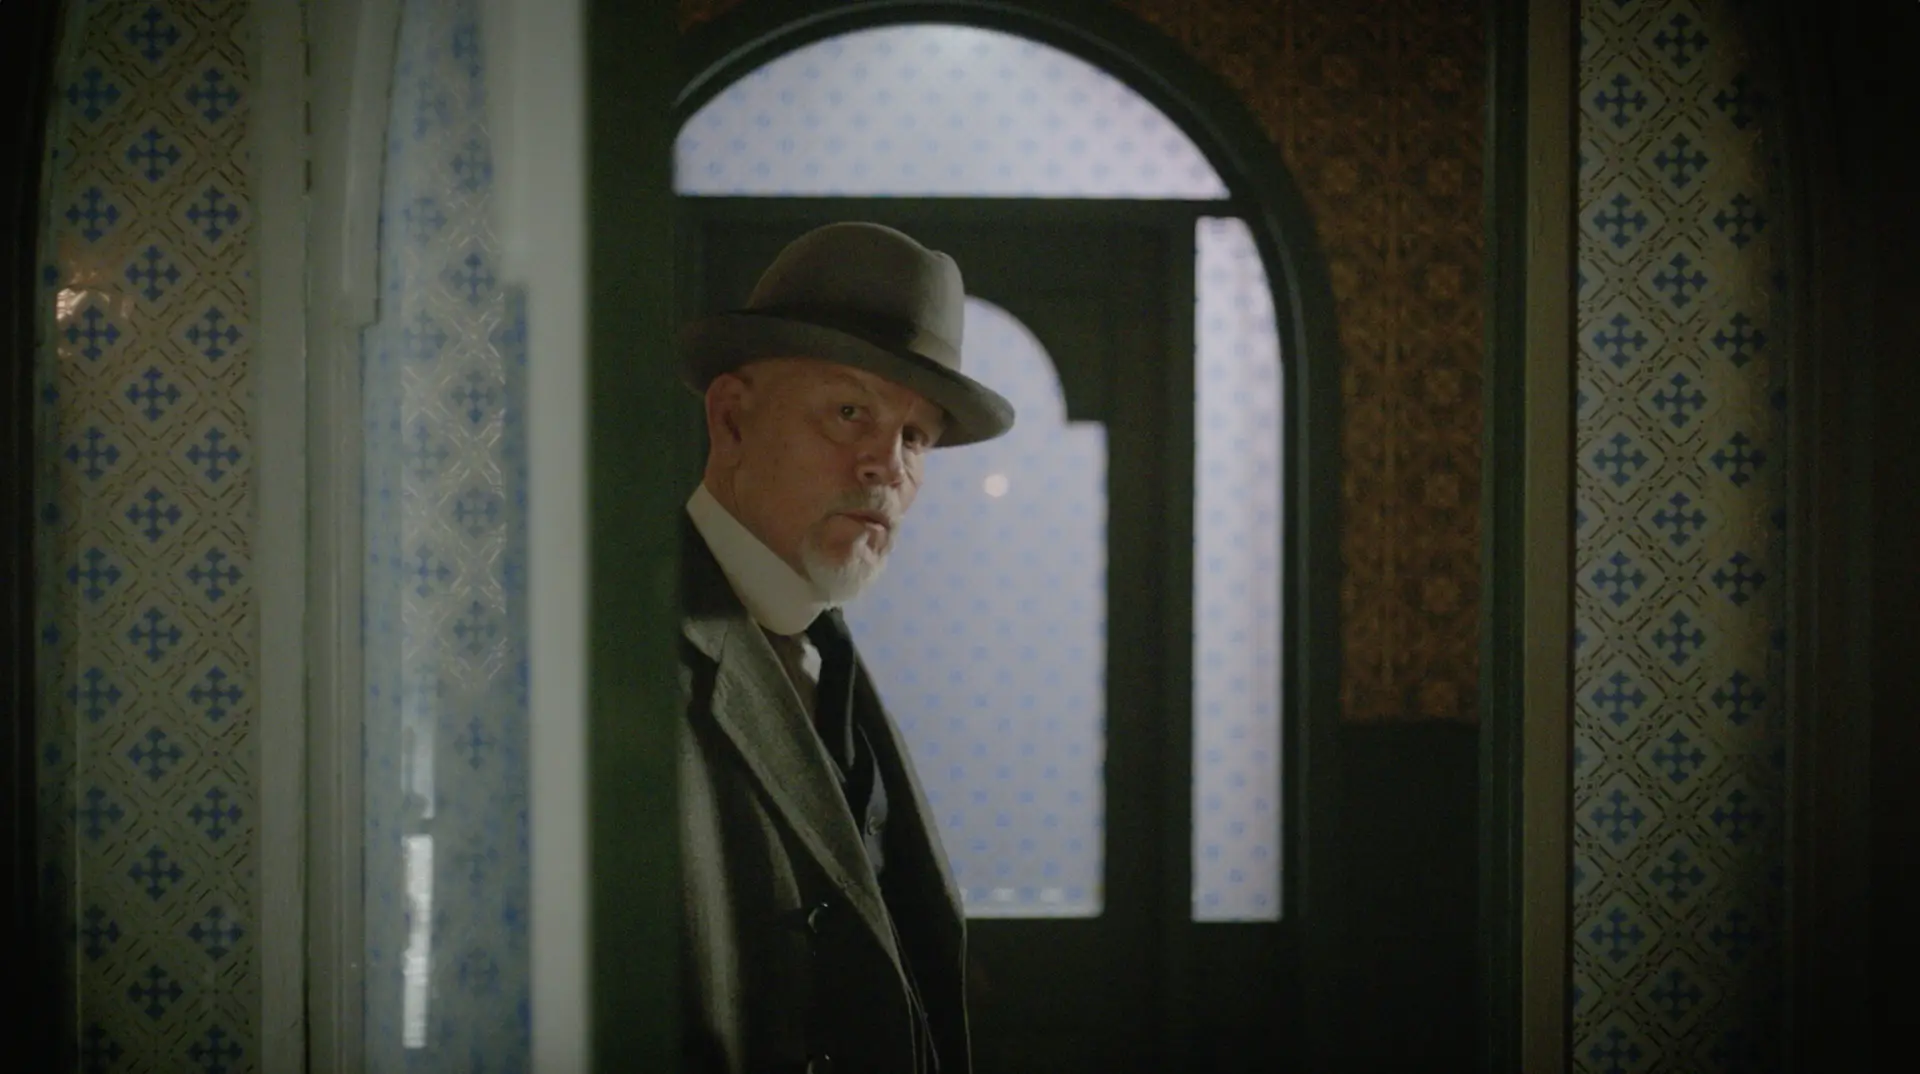 A man in a hat and coat is standing in a doorway, immersed in true crime work.